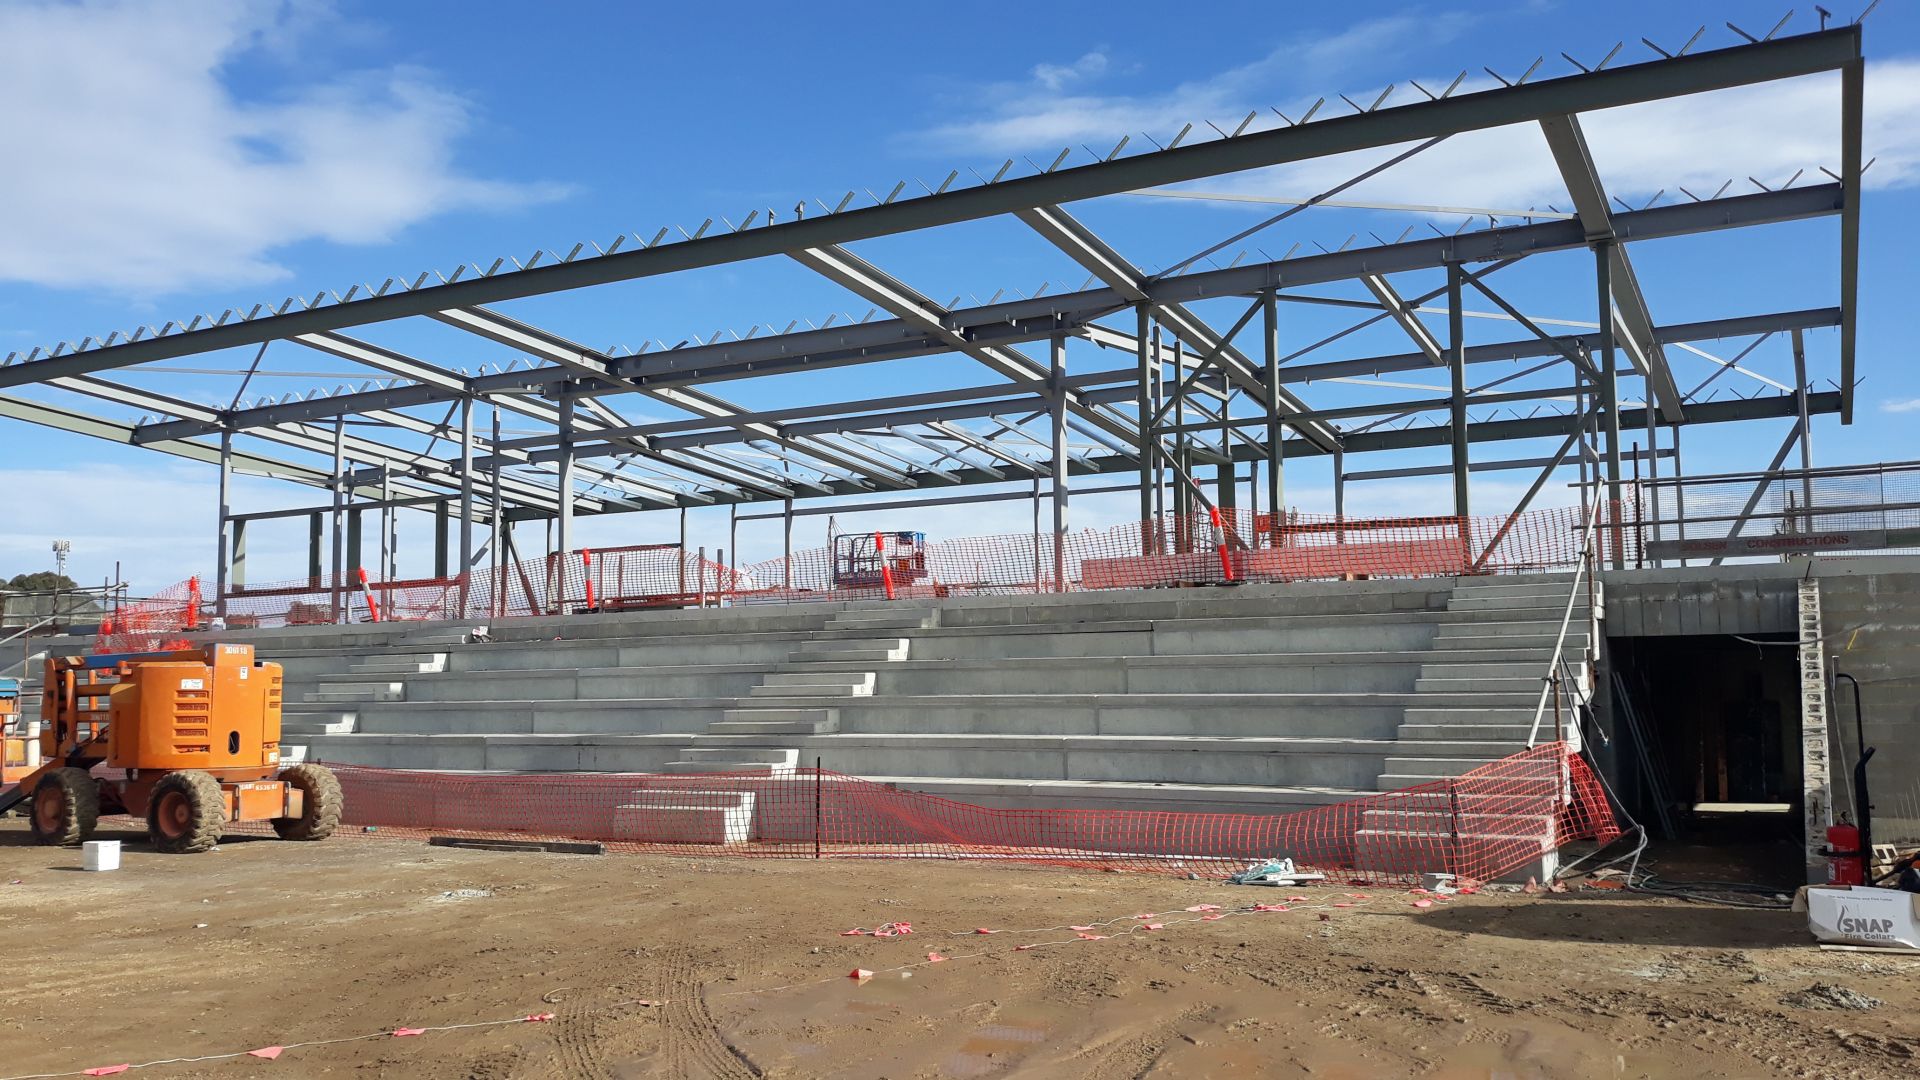 Building B (soccer) progress incl ground floor blockwork walls and teired spectator seating preparation and first floor structural steel